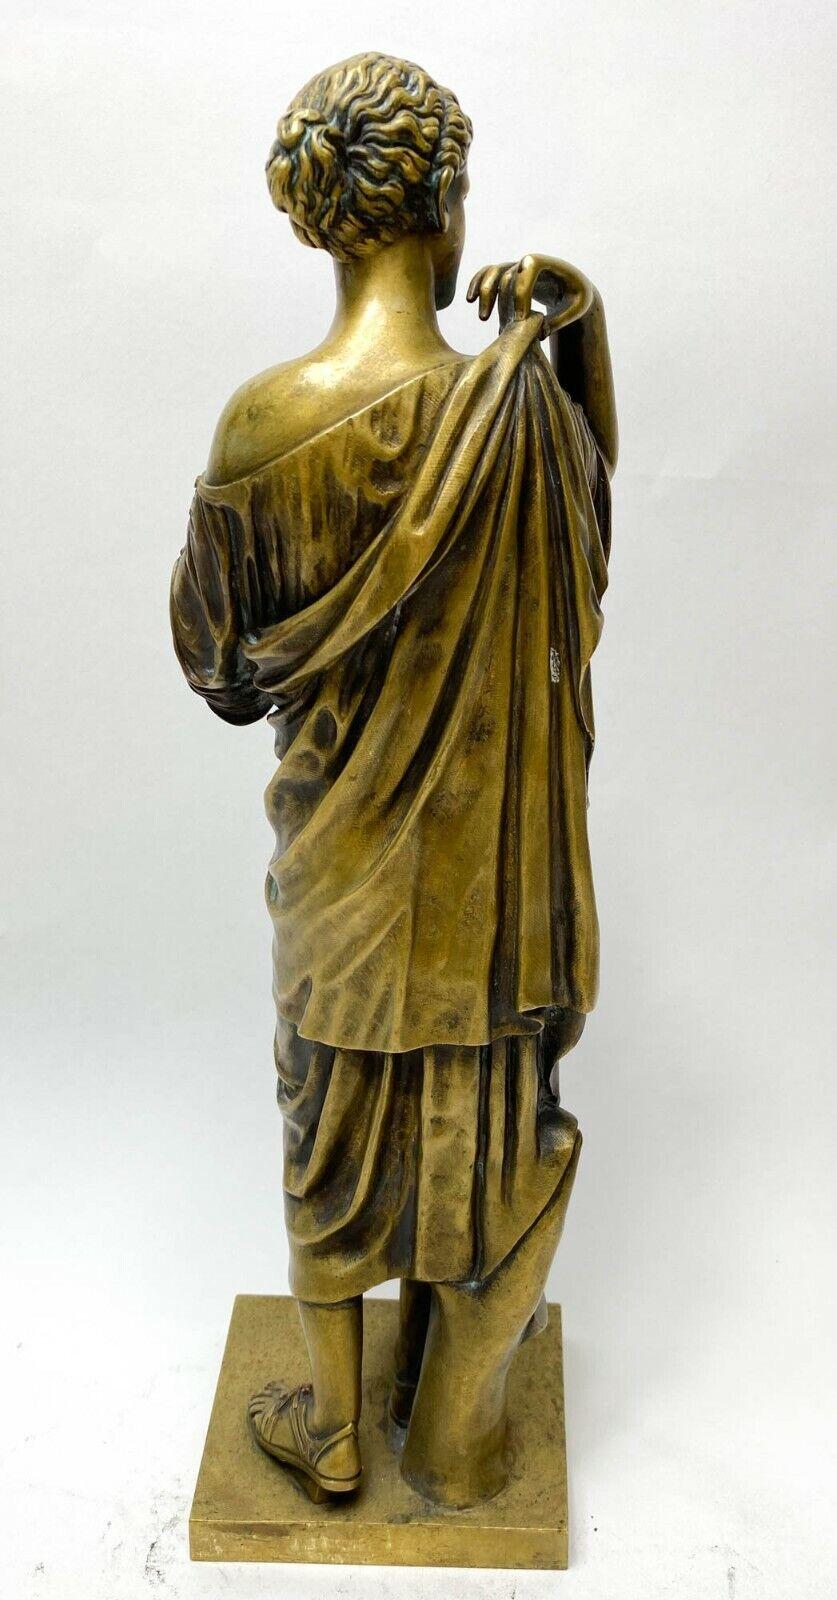 Gilt Bronze Sculpture Susse Freres Foundry Mark of a Classical Maiden, c1800

Very fine details to the sandals as well as to the figure's hair and face. 

Additional Information: 
Material: Bronze
Type: Statue
Dimension: 4.8 in. x 4.1 in. x